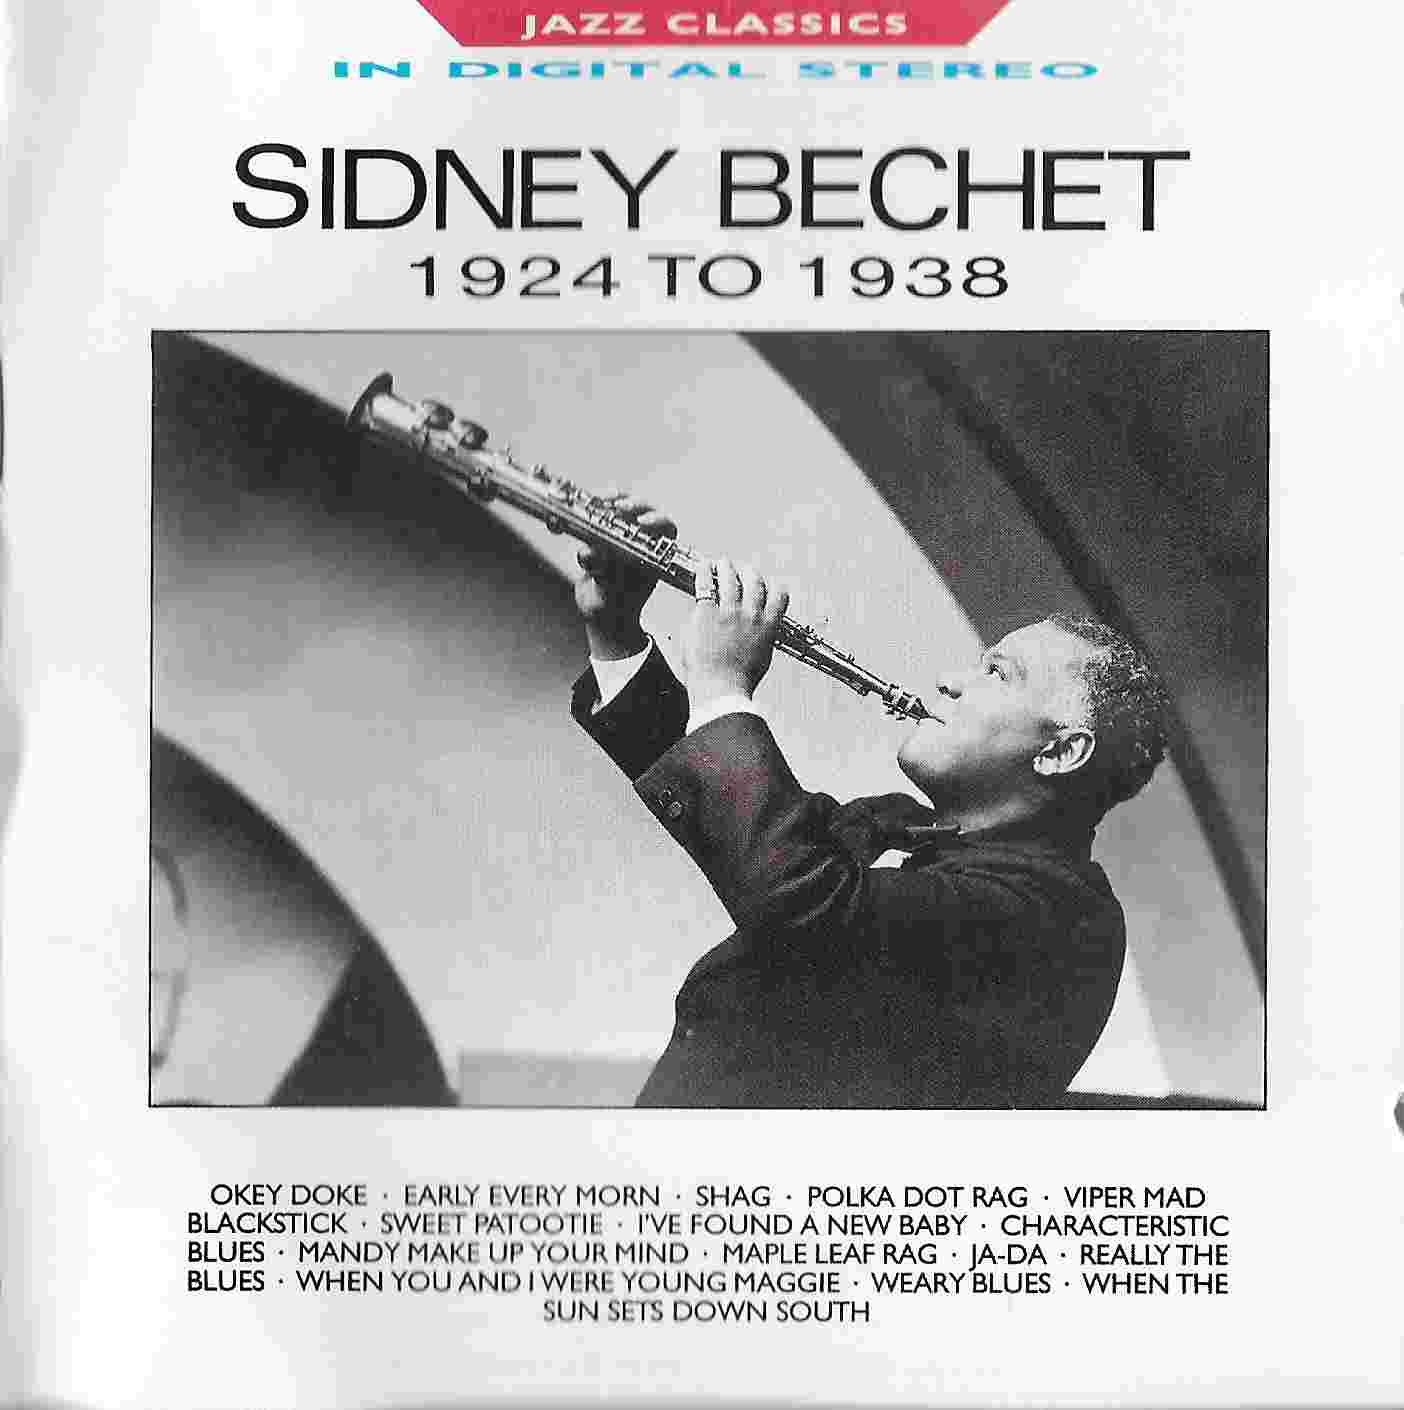 Picture of BBCCD700 Jazz classics - Sidney Bechet 1925 - 1928 by artist Sidney Bechet  from the BBC cds - Records and Tapes library